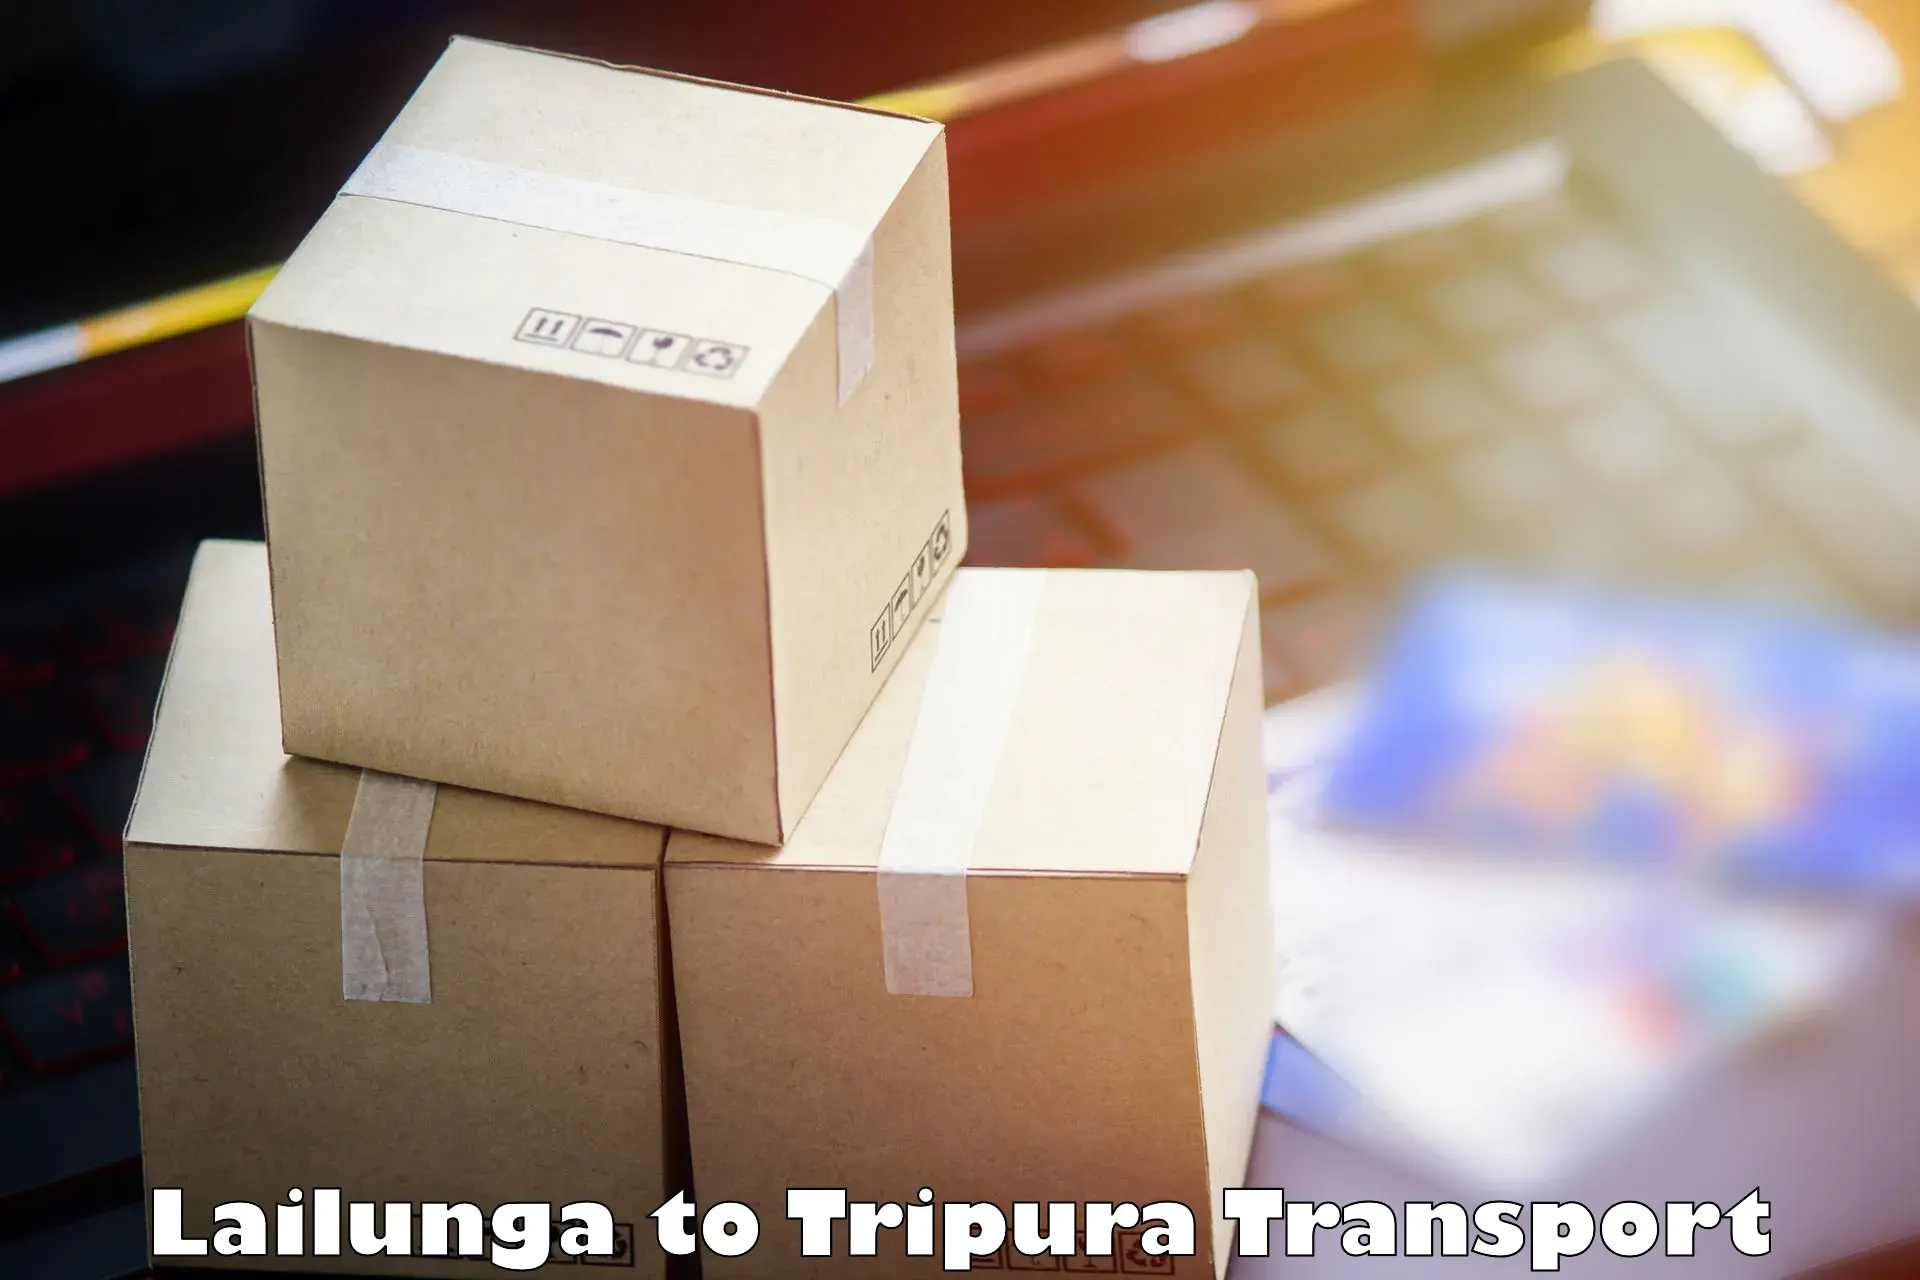 Road transport services Lailunga to North Tripura